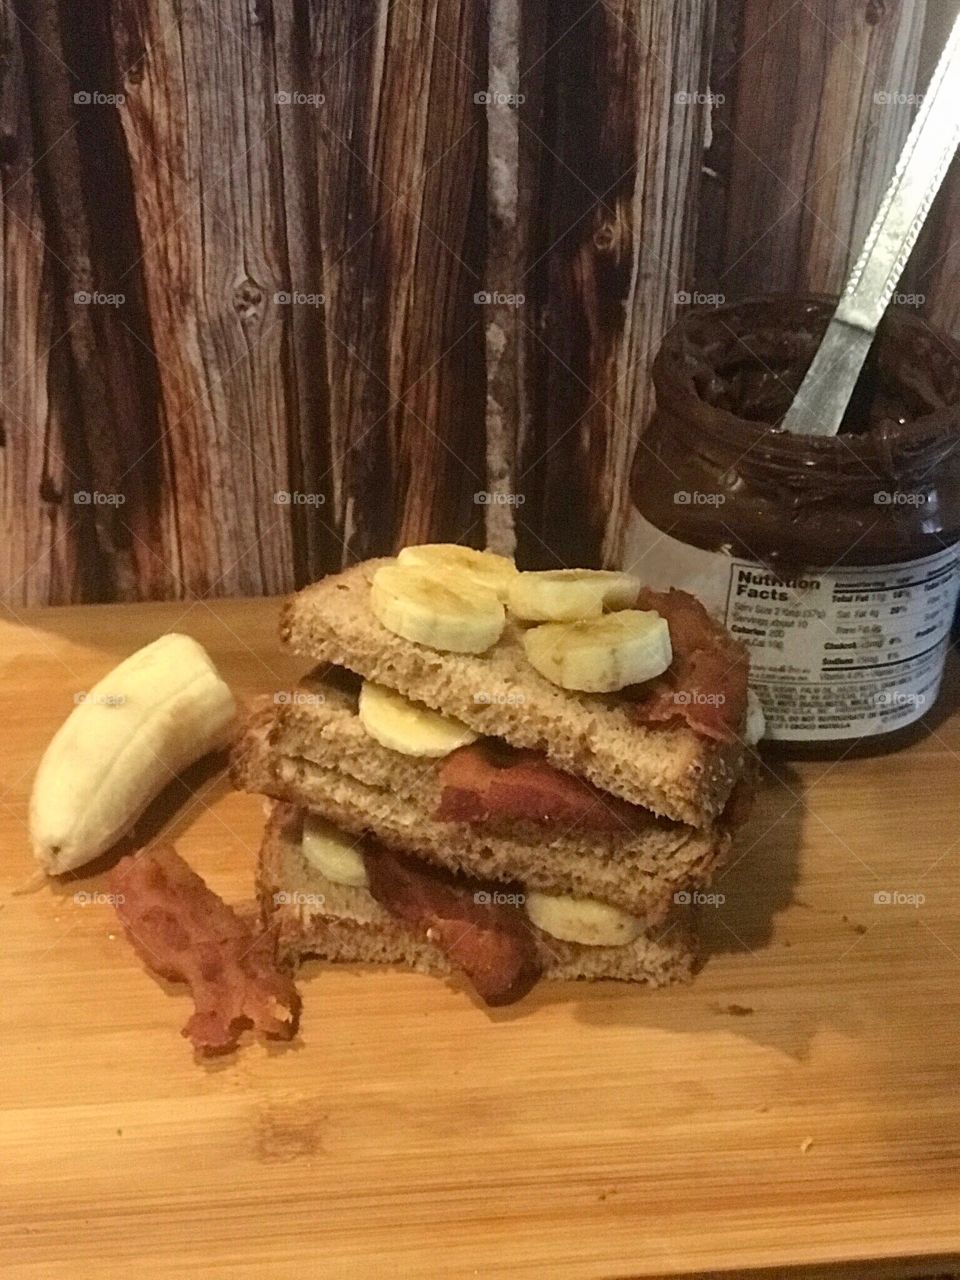 A Nutella, bacon and banana sandwich displayed on a cutting board against a wooden rustic background for lunch. USA, America 